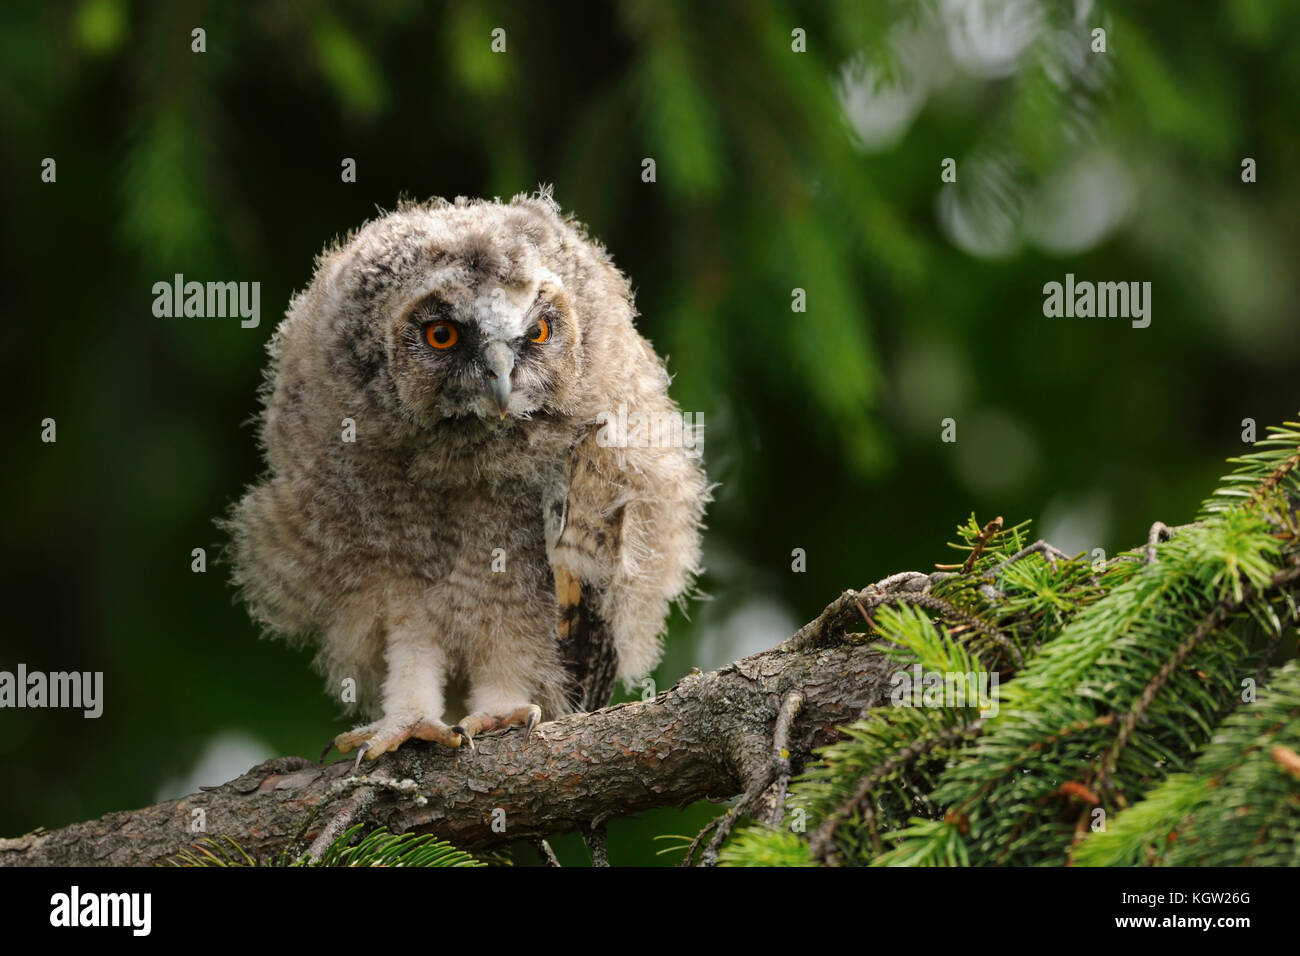 Long-eared Owl ( Asio otus ), young chick, just fledged, perched in a tree, looks alert, watching, peeking attentively, serious, wildlife, Europe. Stock Photo